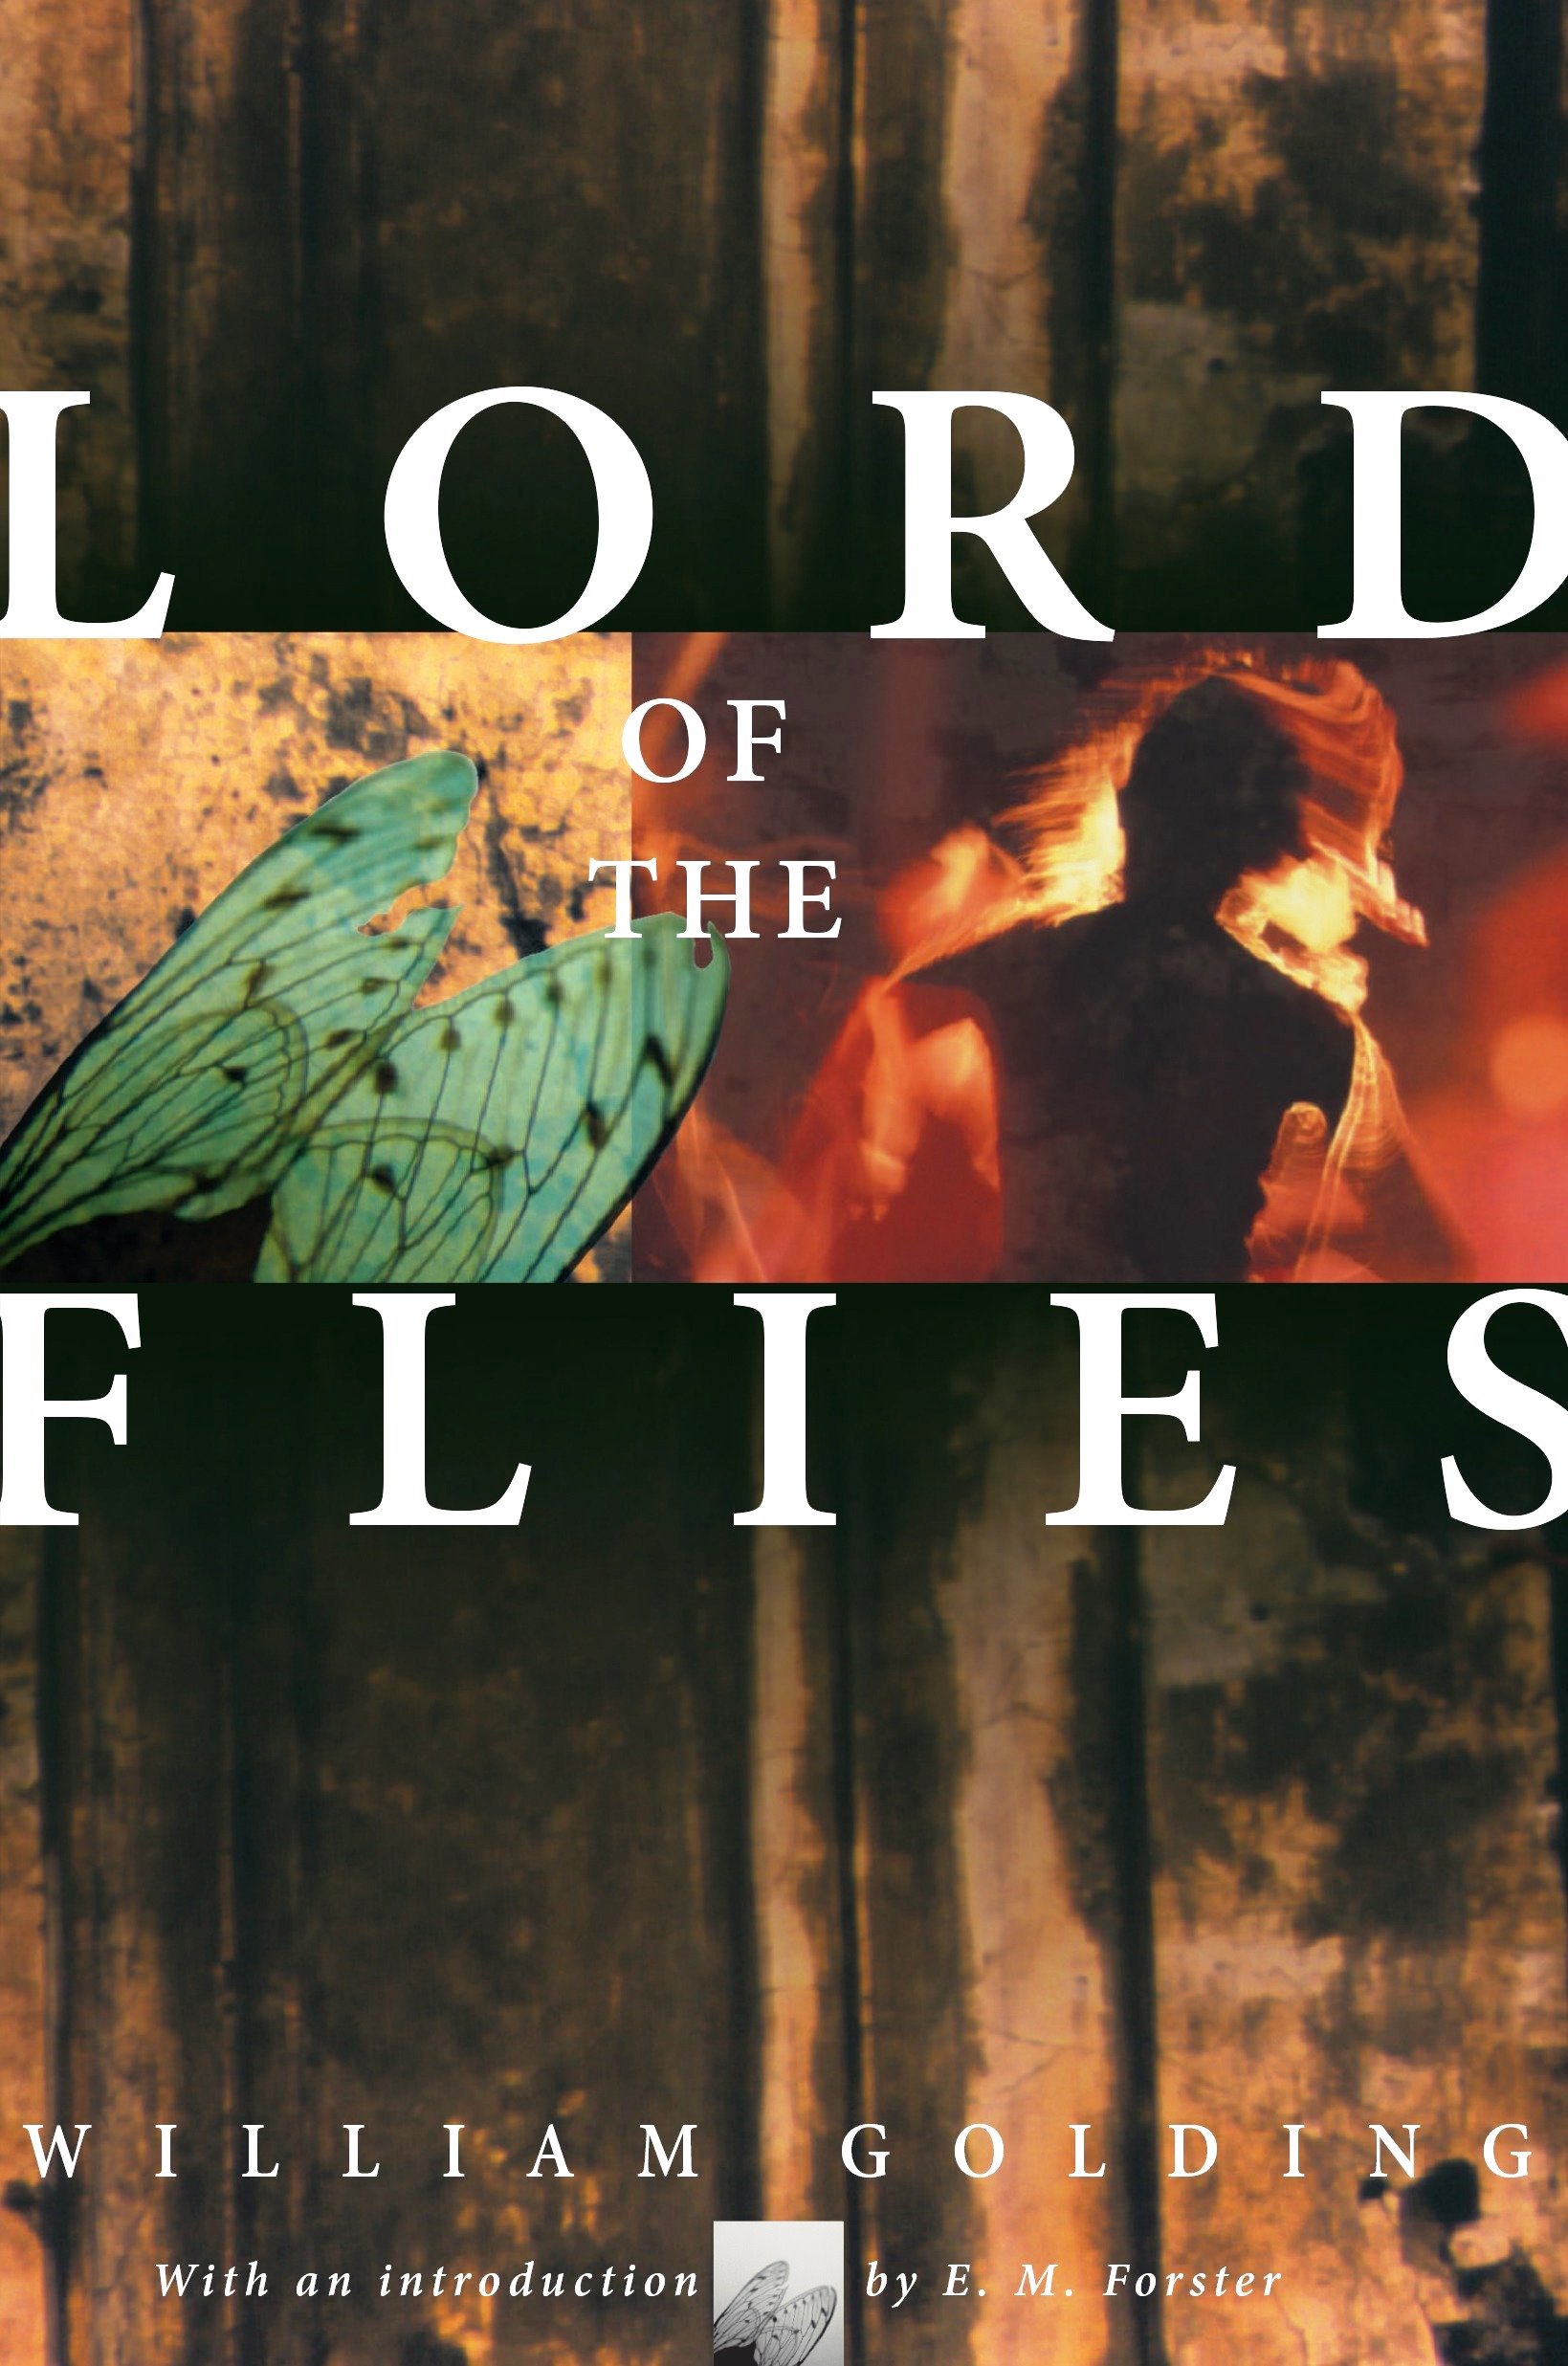 Lord of the Flies William Golding PDF Free Download online